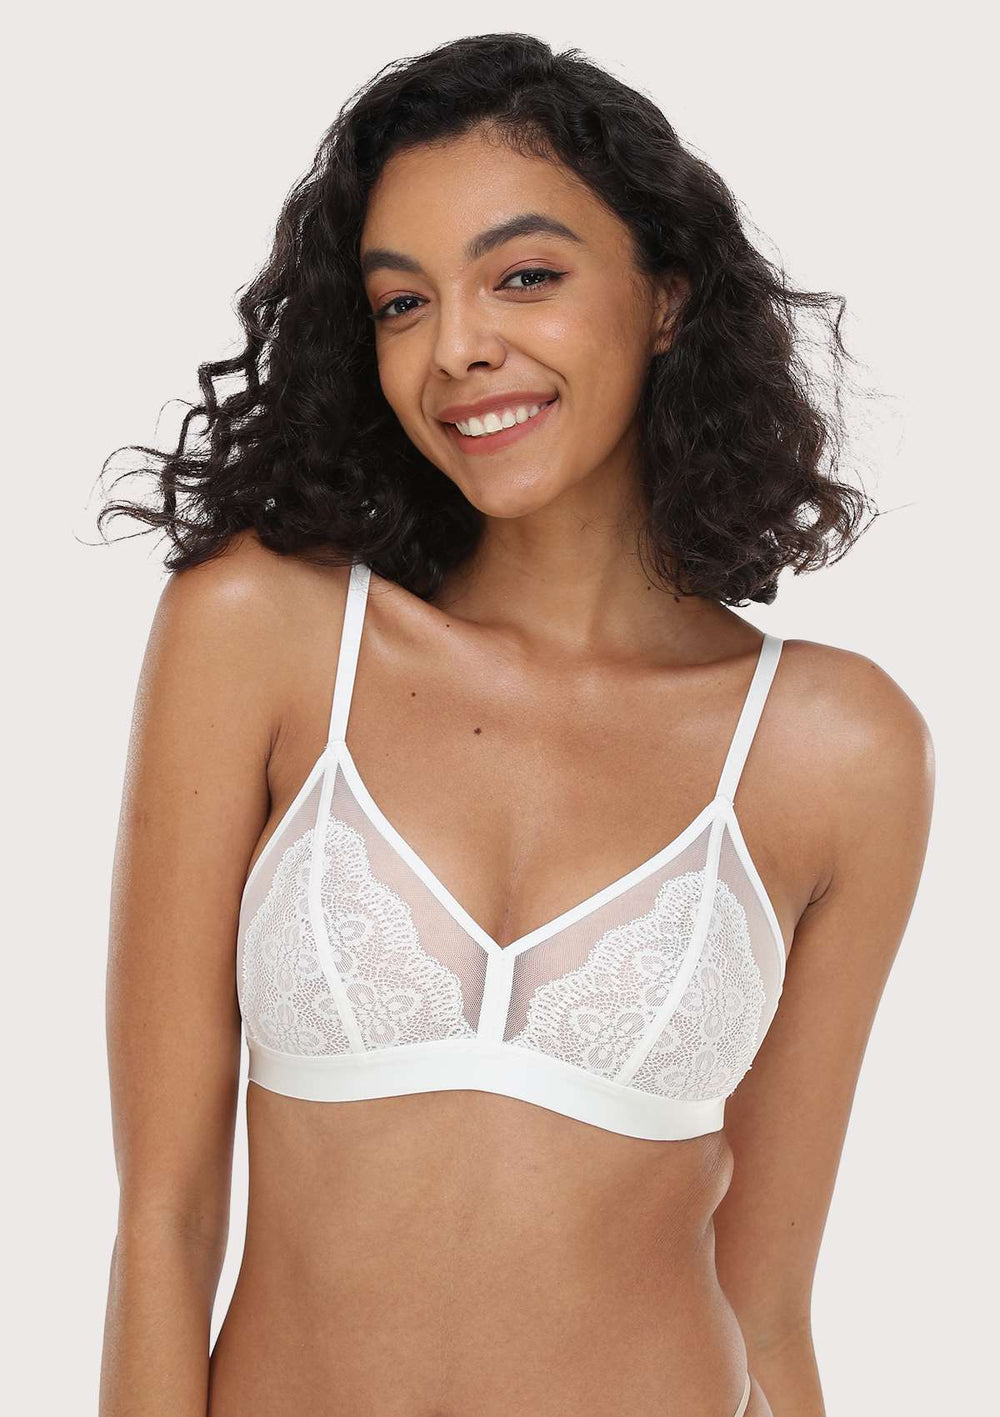 Floral Lace Wirefree Bralette, Comfort Bras